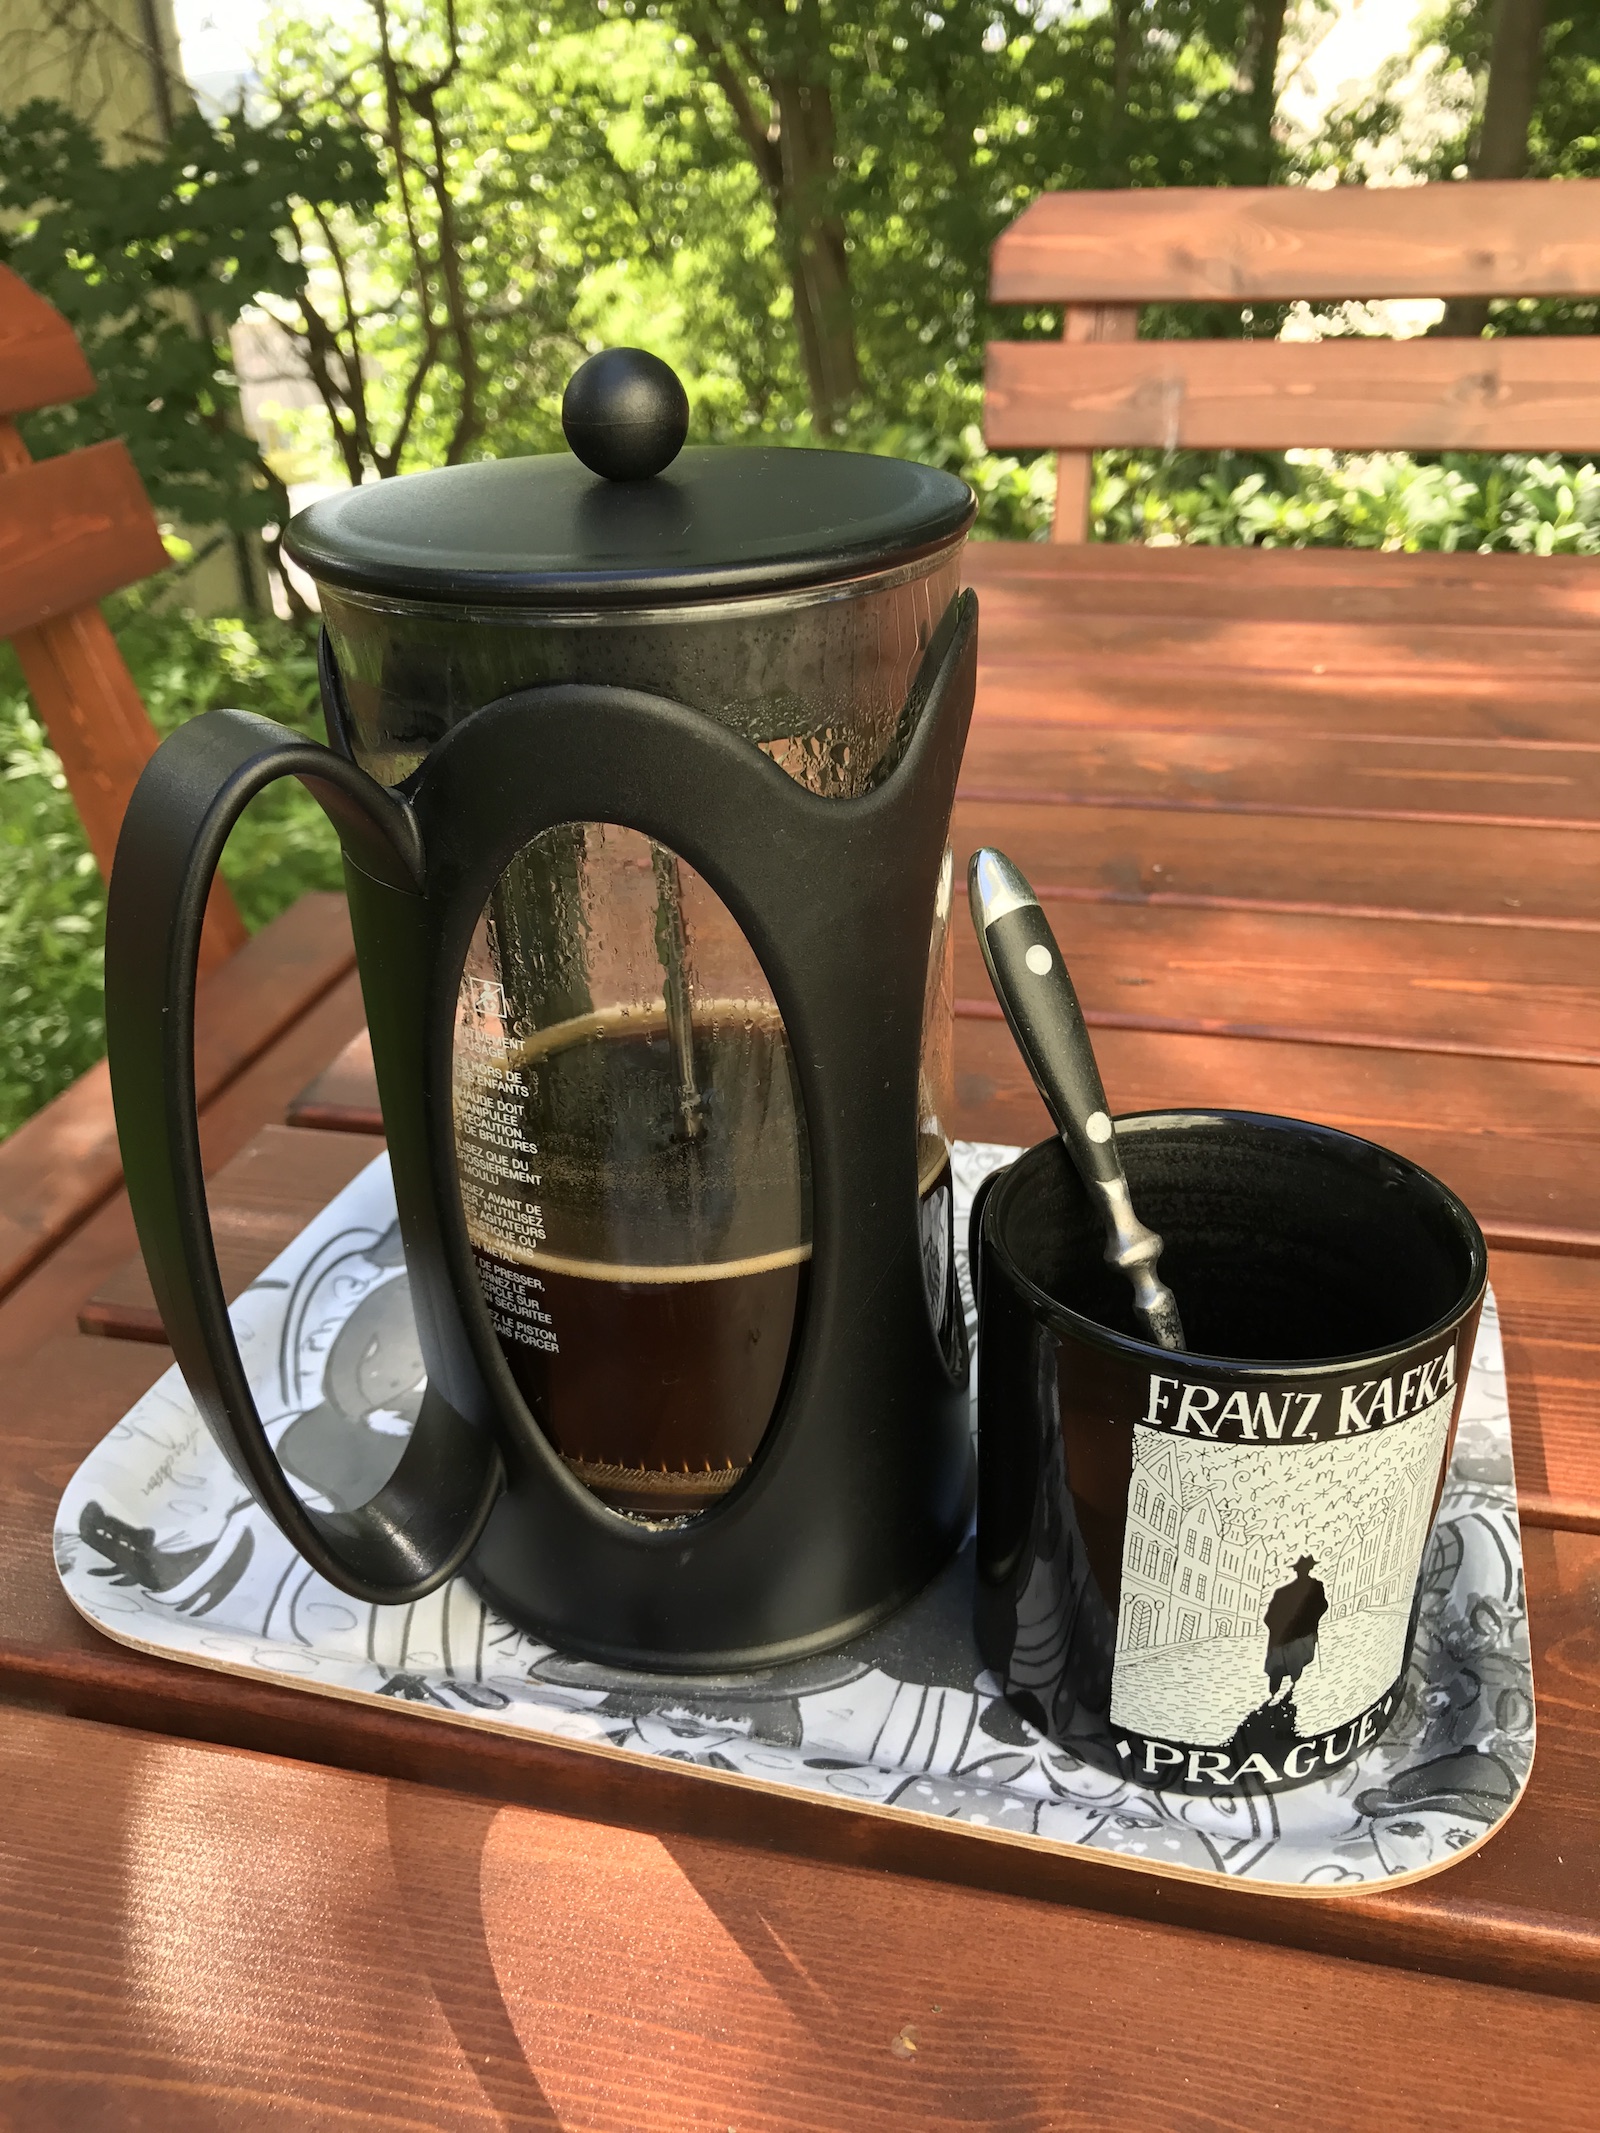 Press of coffee in the garden